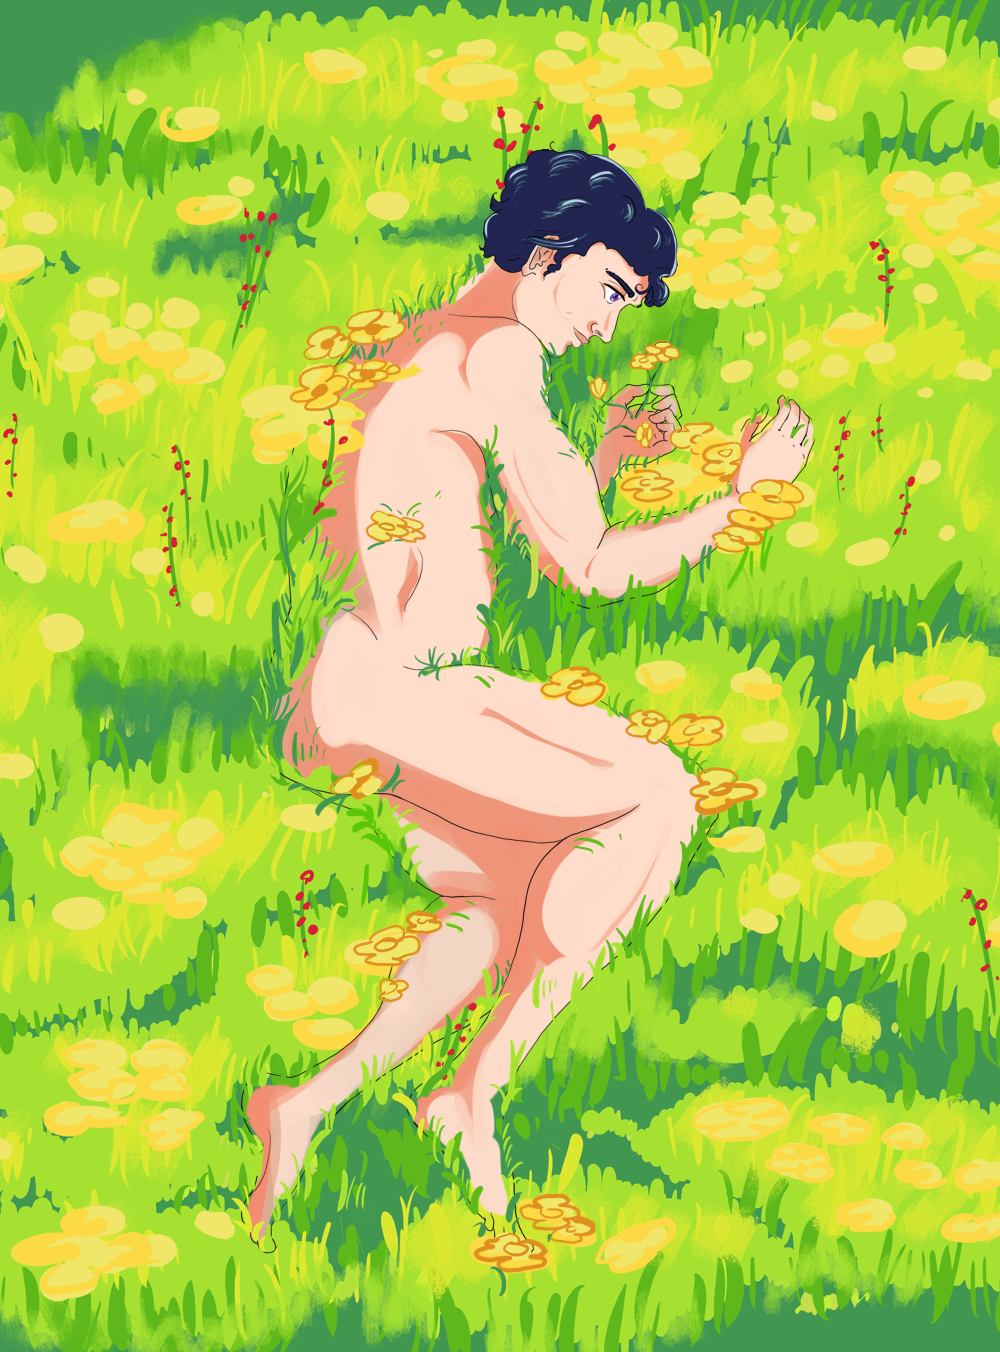 A naked man lying in a sunny field, half sunken into the grass